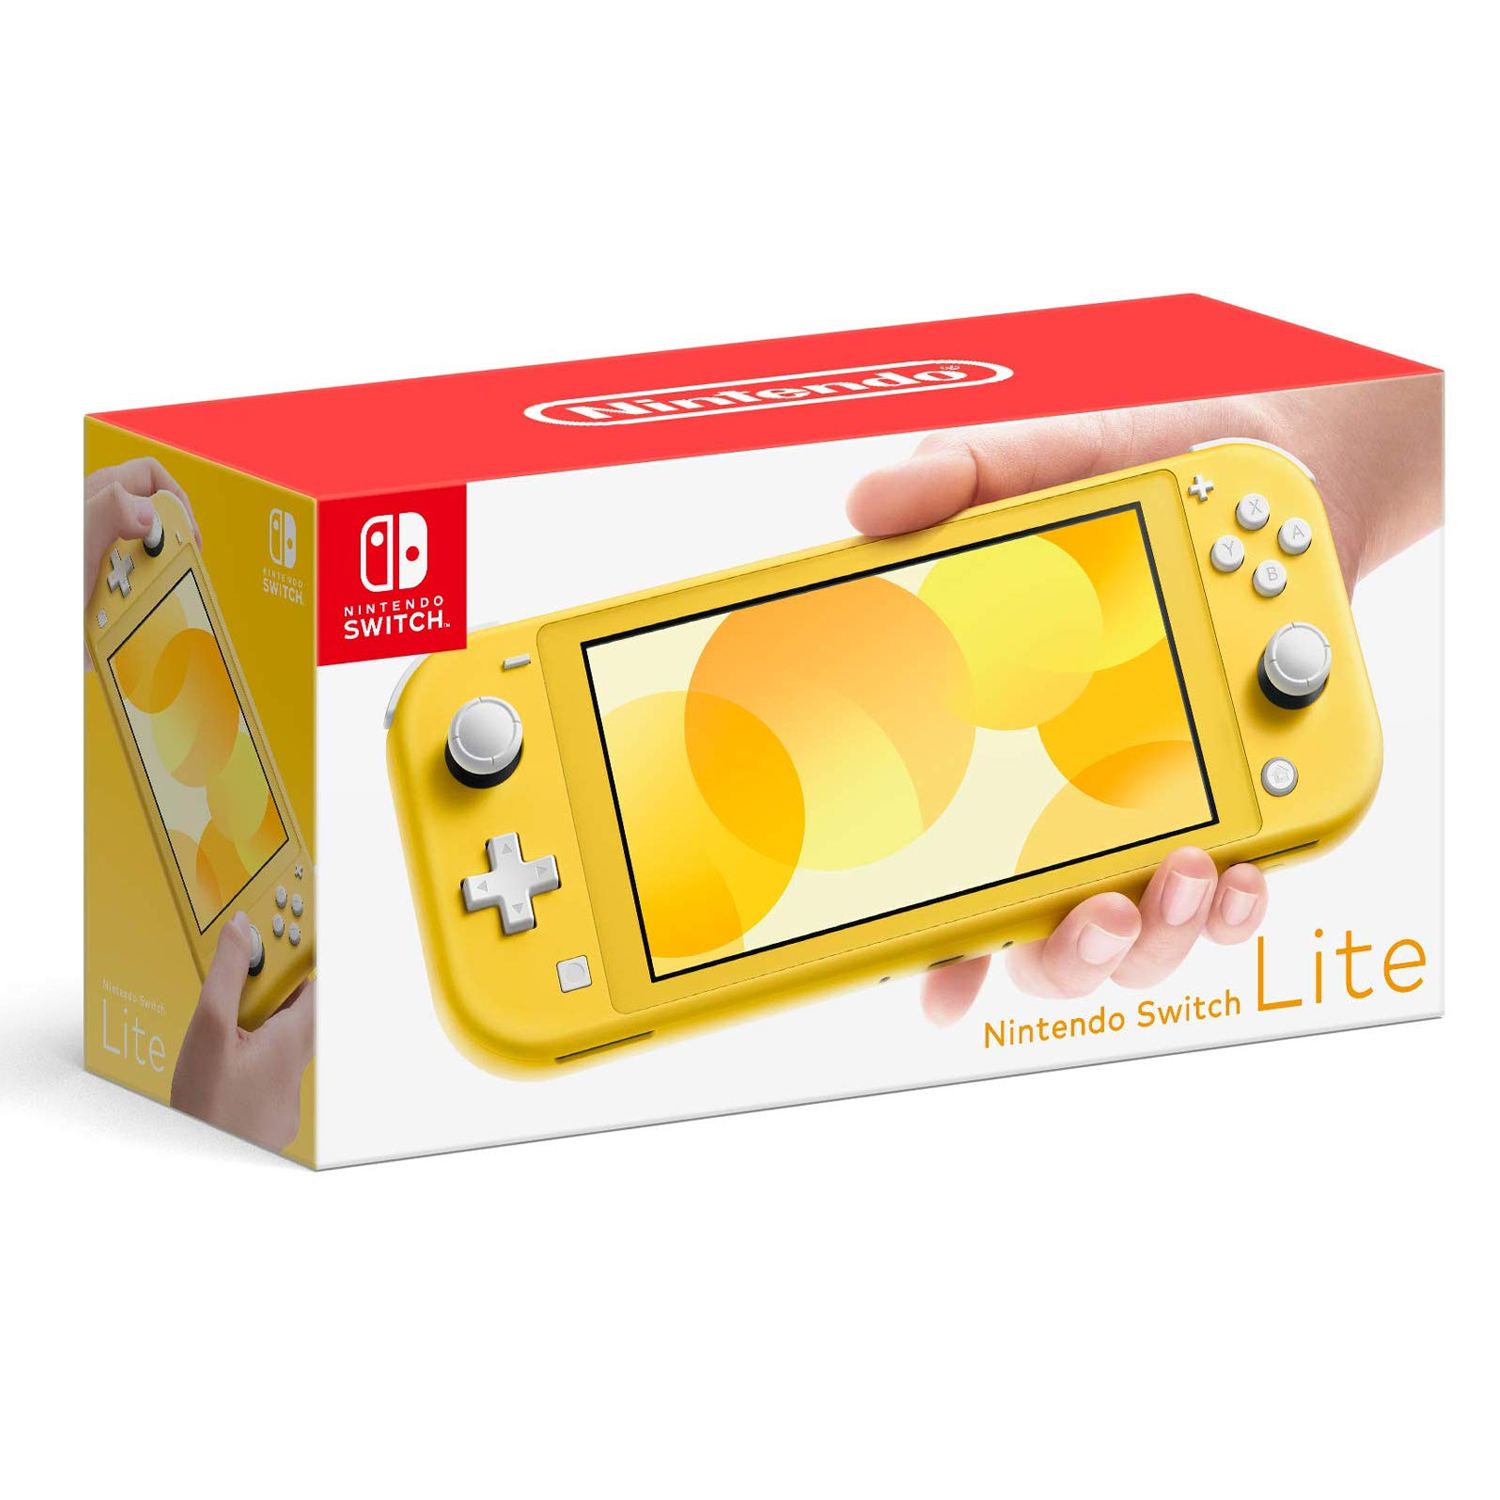 Nintendo Switch Lite Hand-Held Gaming Console Blue HDH-001 From JP